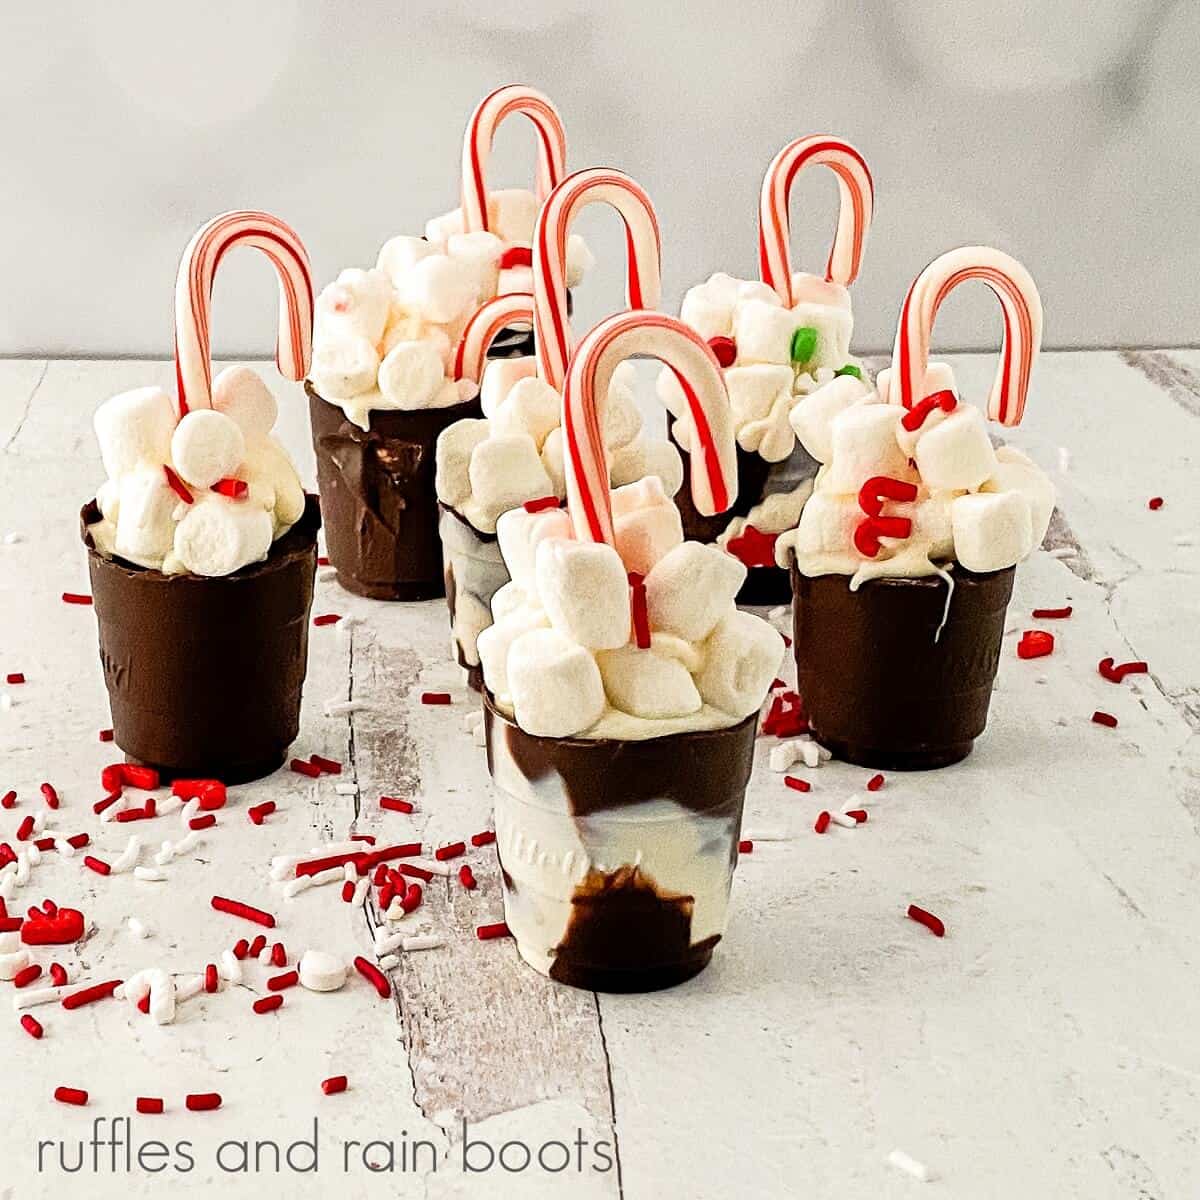 A square image of a group of decorated Hot Cocoa Cup Shots against a white backdrop with holiday sprinkles scattered around them against a white backdrop.